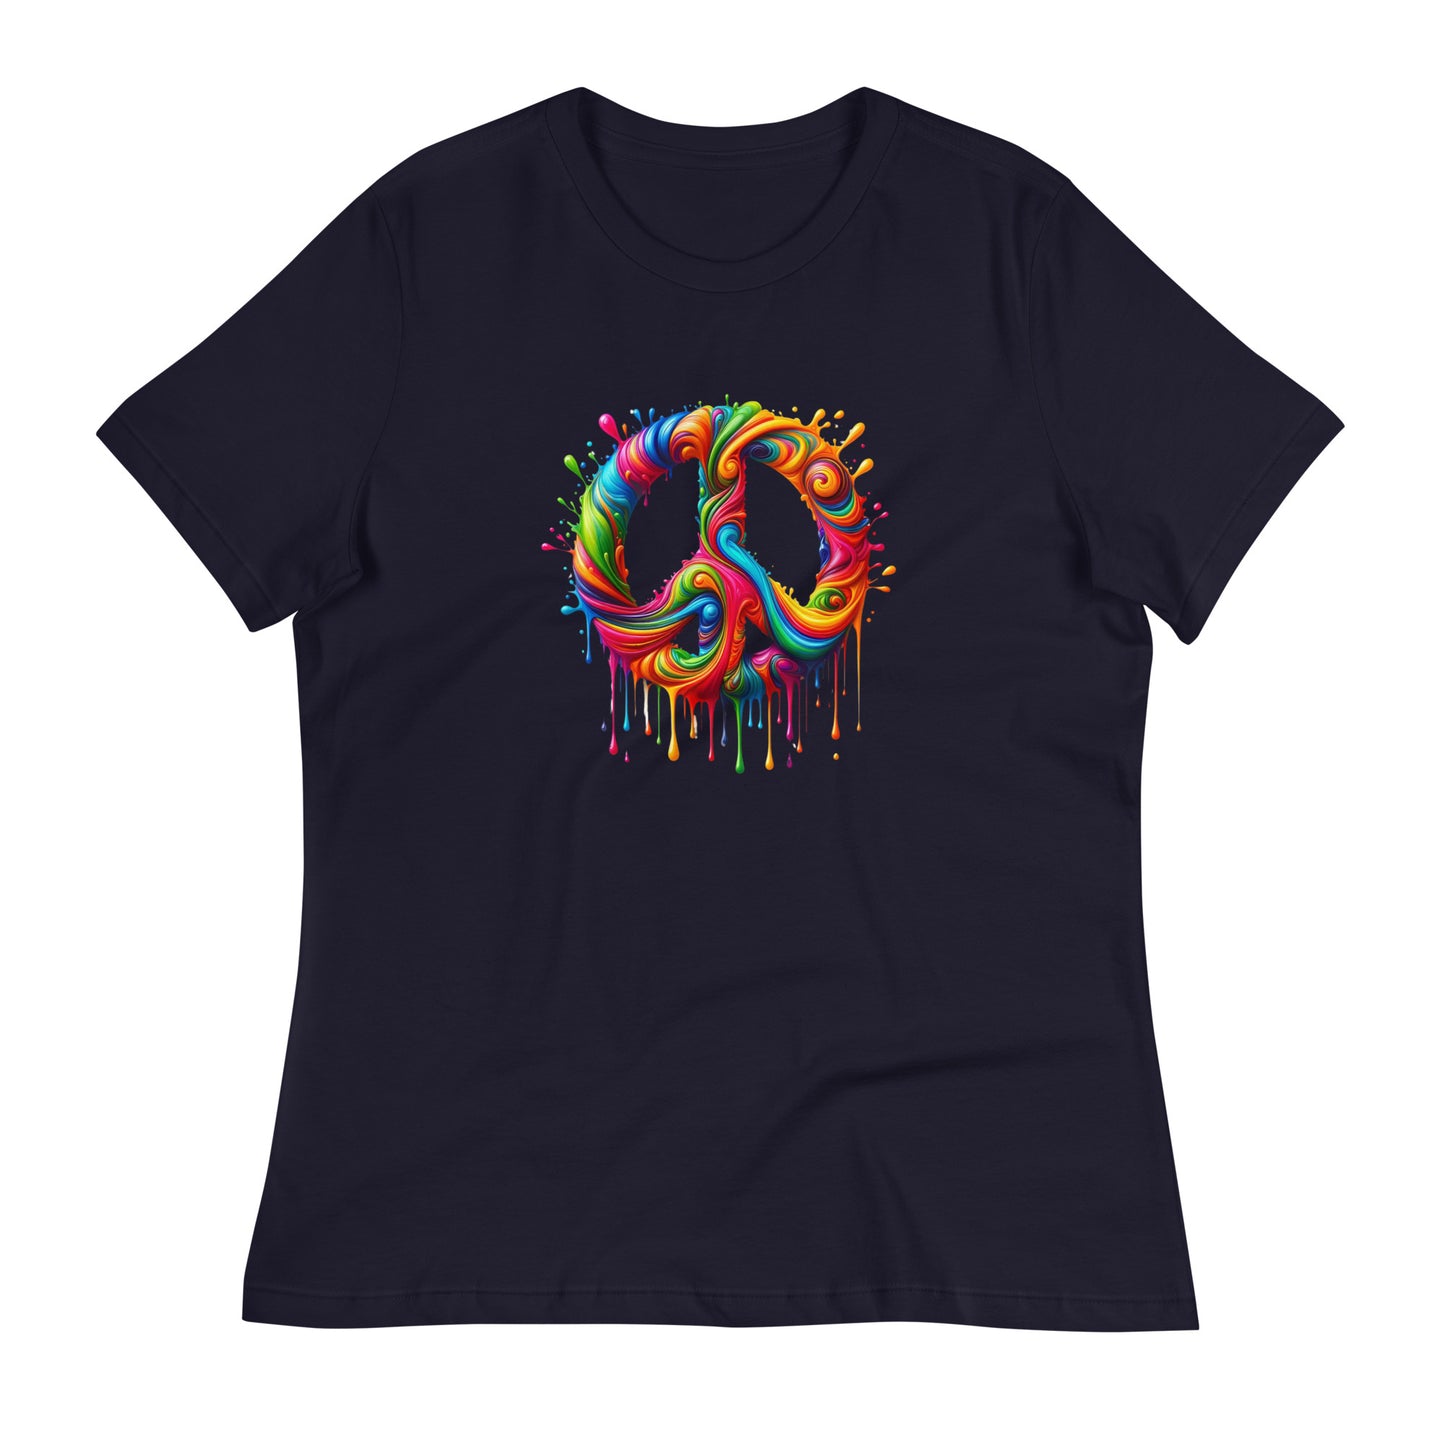 Dripping Colors of Peace Women's T-Shirt